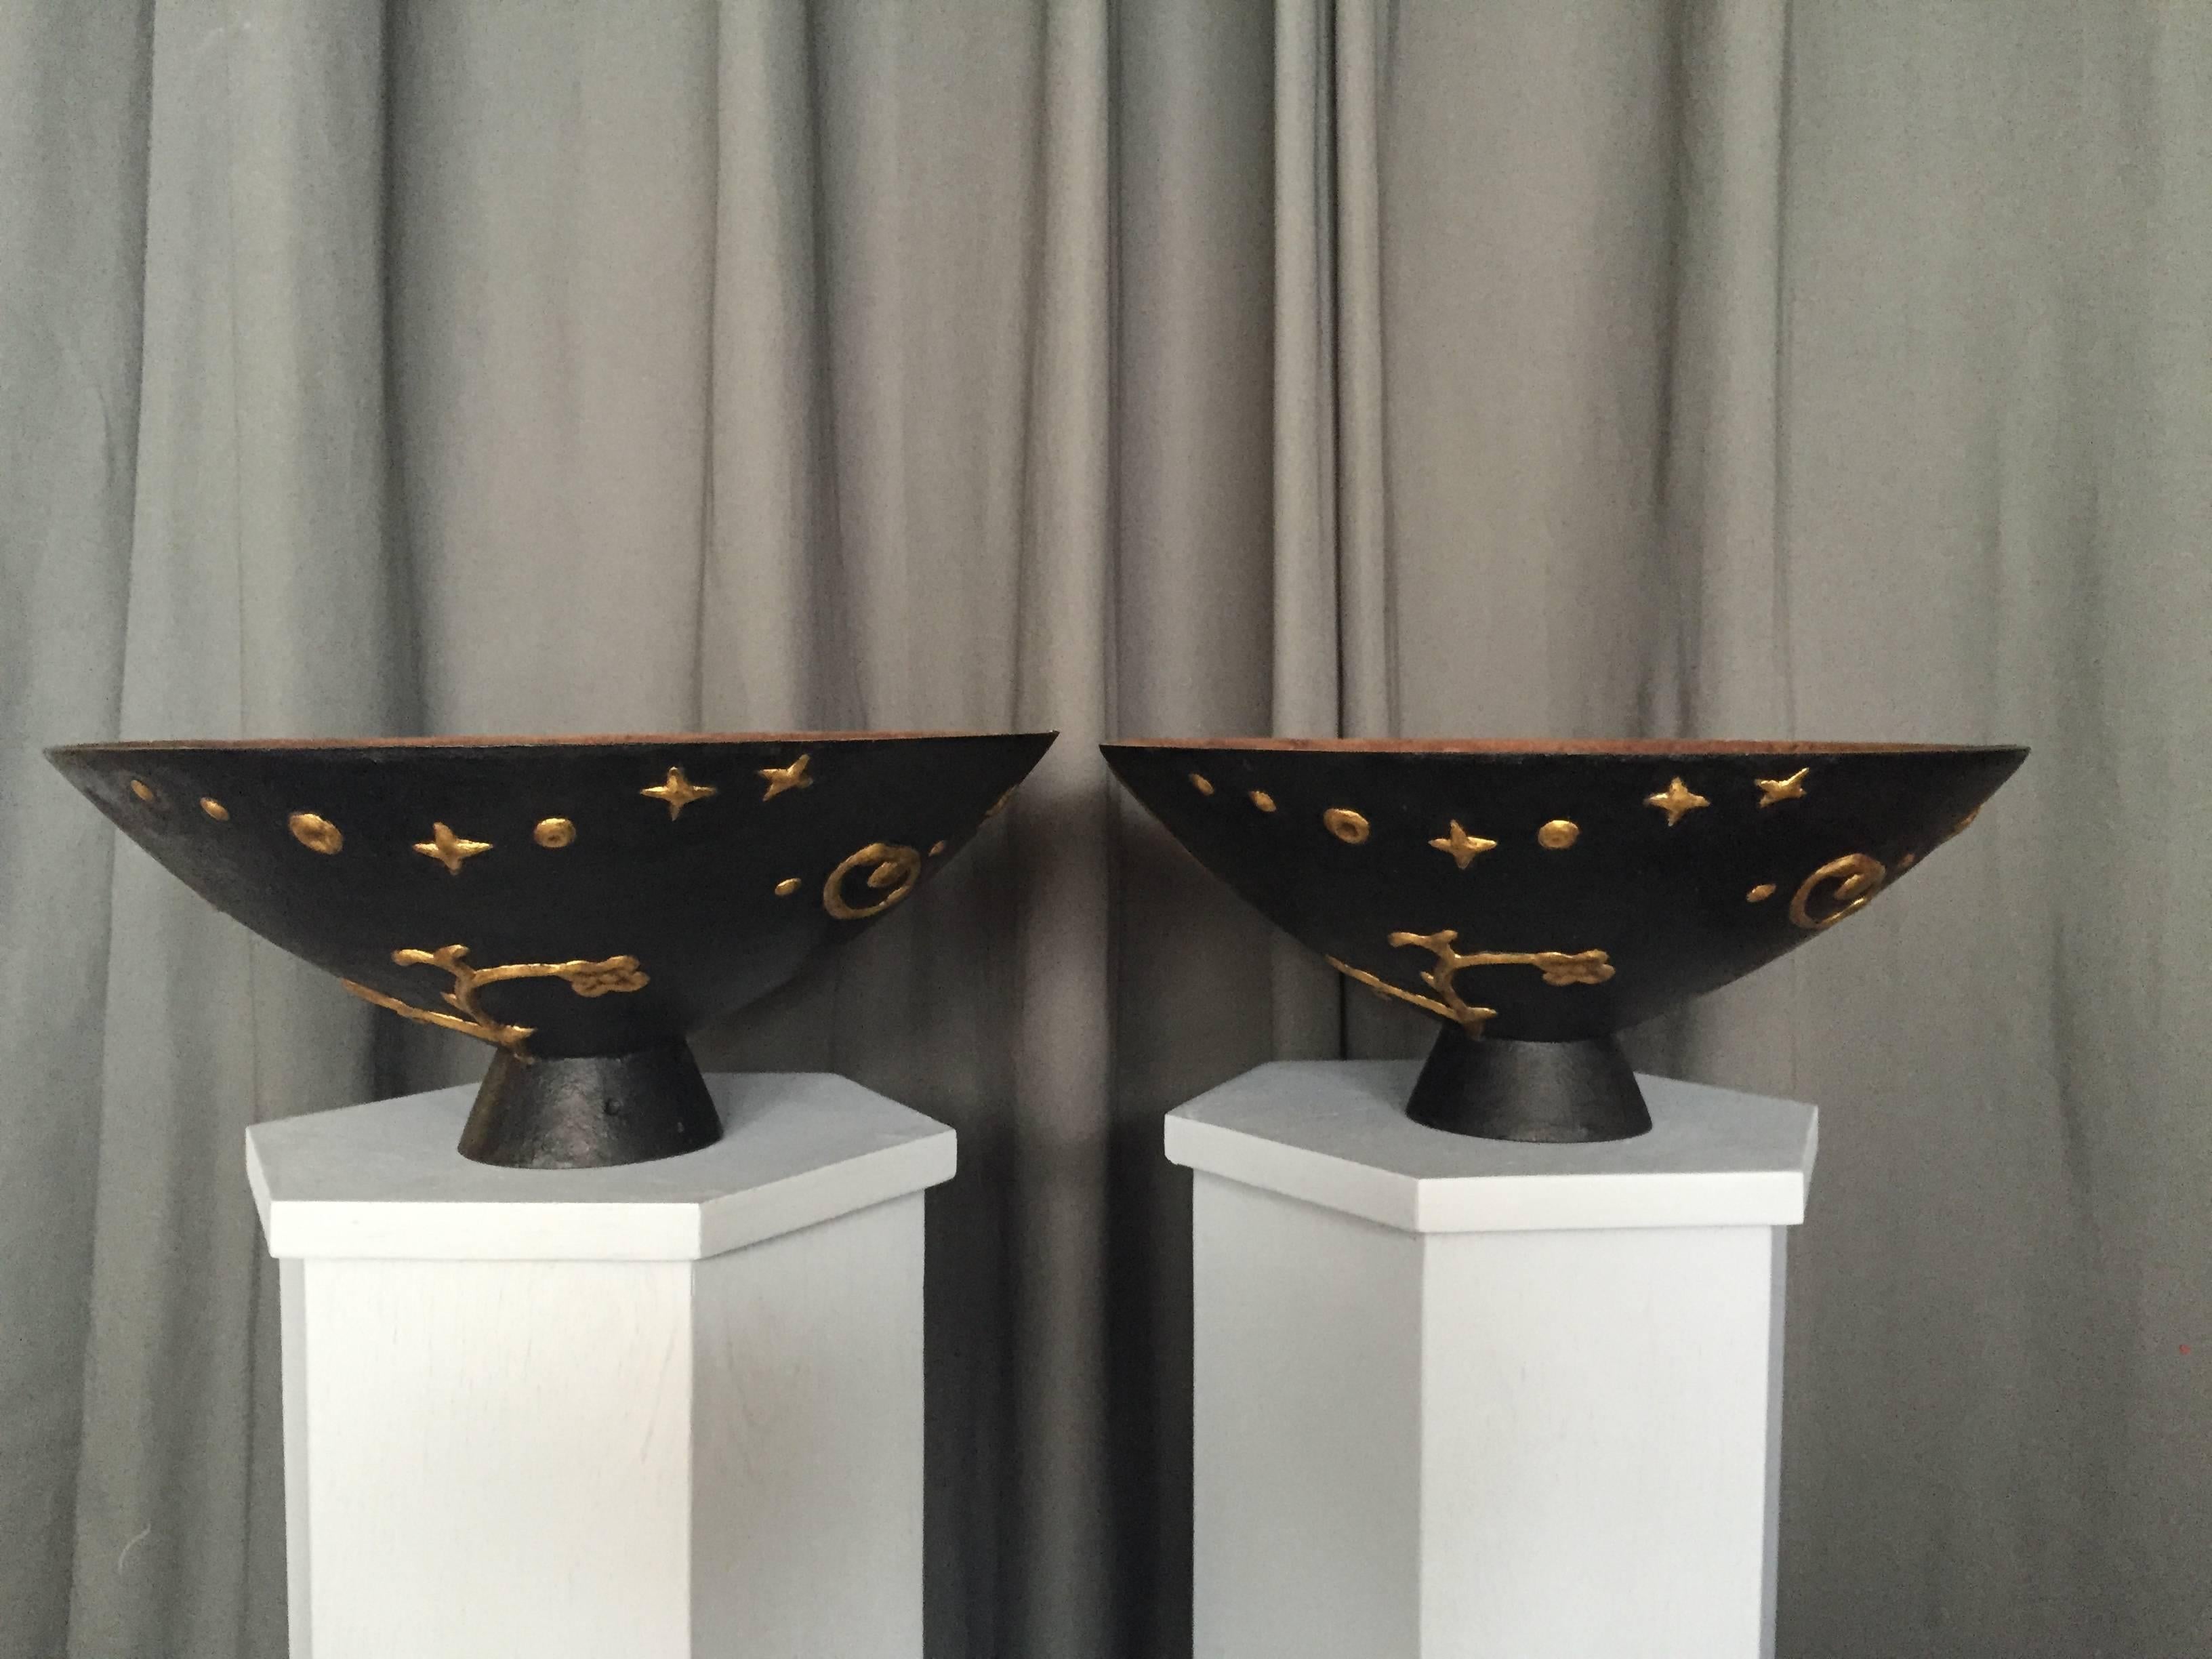 A pair of cast iron urns “Mikrokosmos” designed by Olof Hult (1892-1962) for Nafveqvarns Bruk, Sweden, designed 1922, executed 1920s-1930s. Gilded and painted later. Height 7